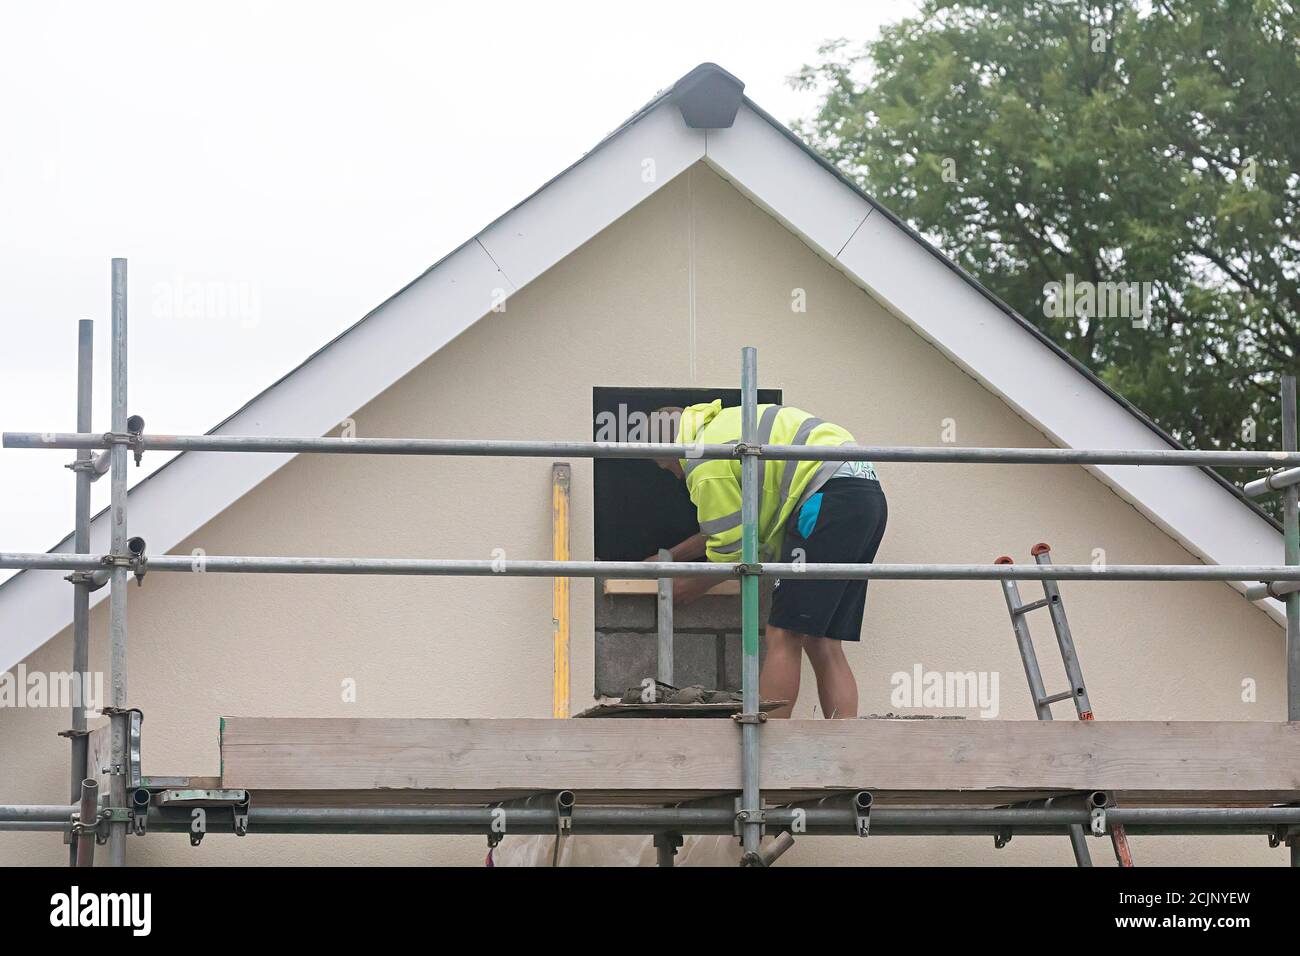 Man blocking up a house gable end window which did not pass planning permission, Wales, UK Stock Photo